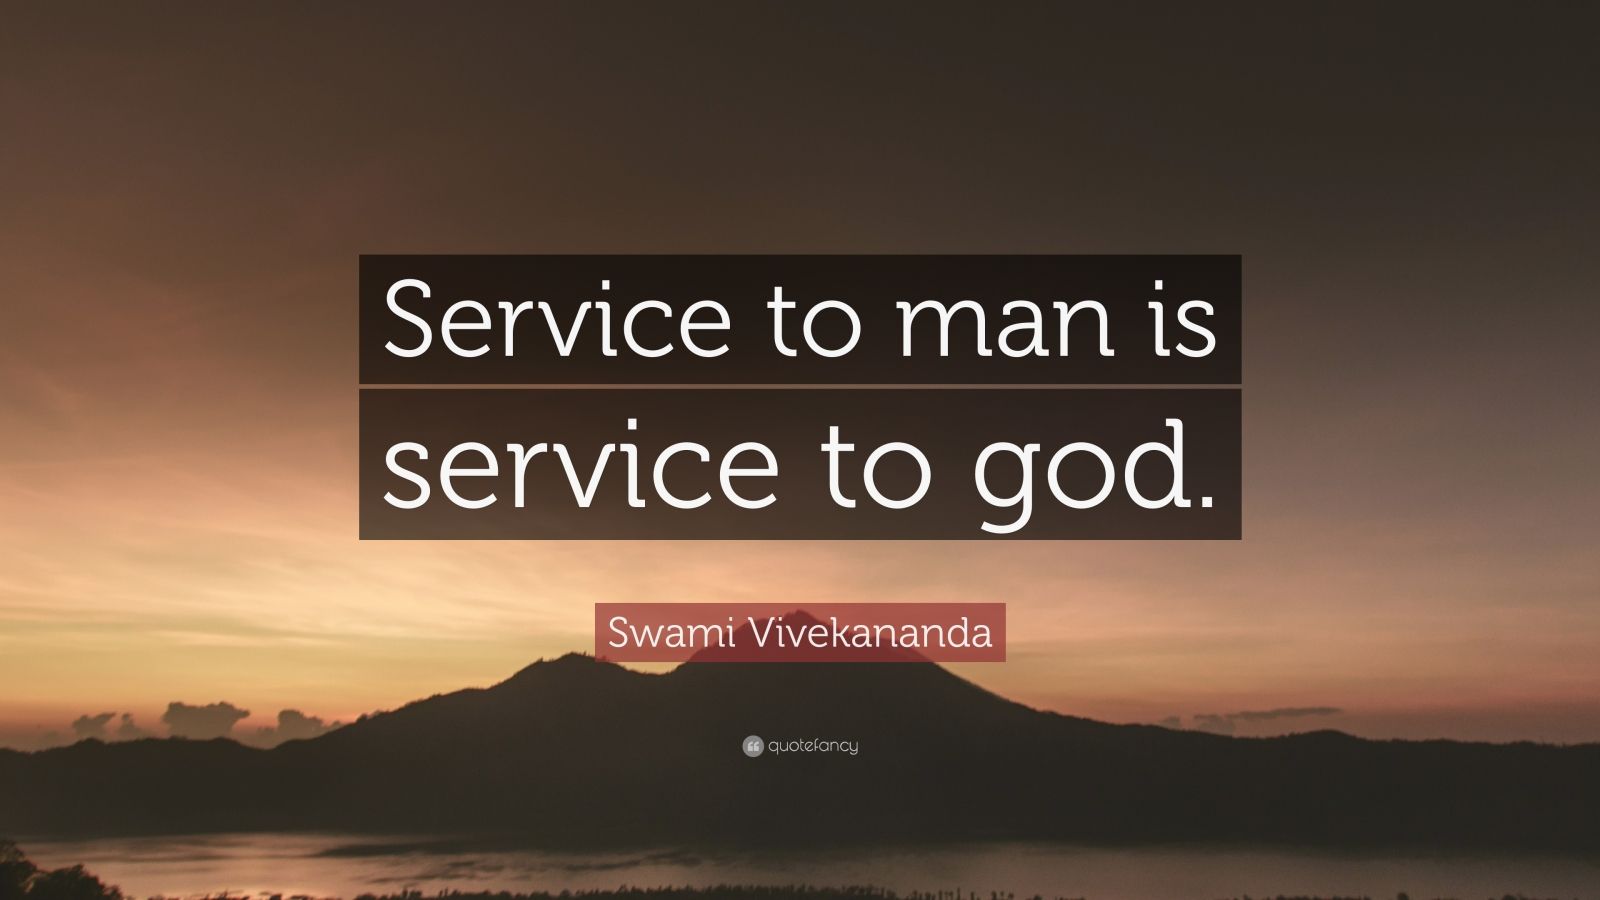 Essay service to man is service to god